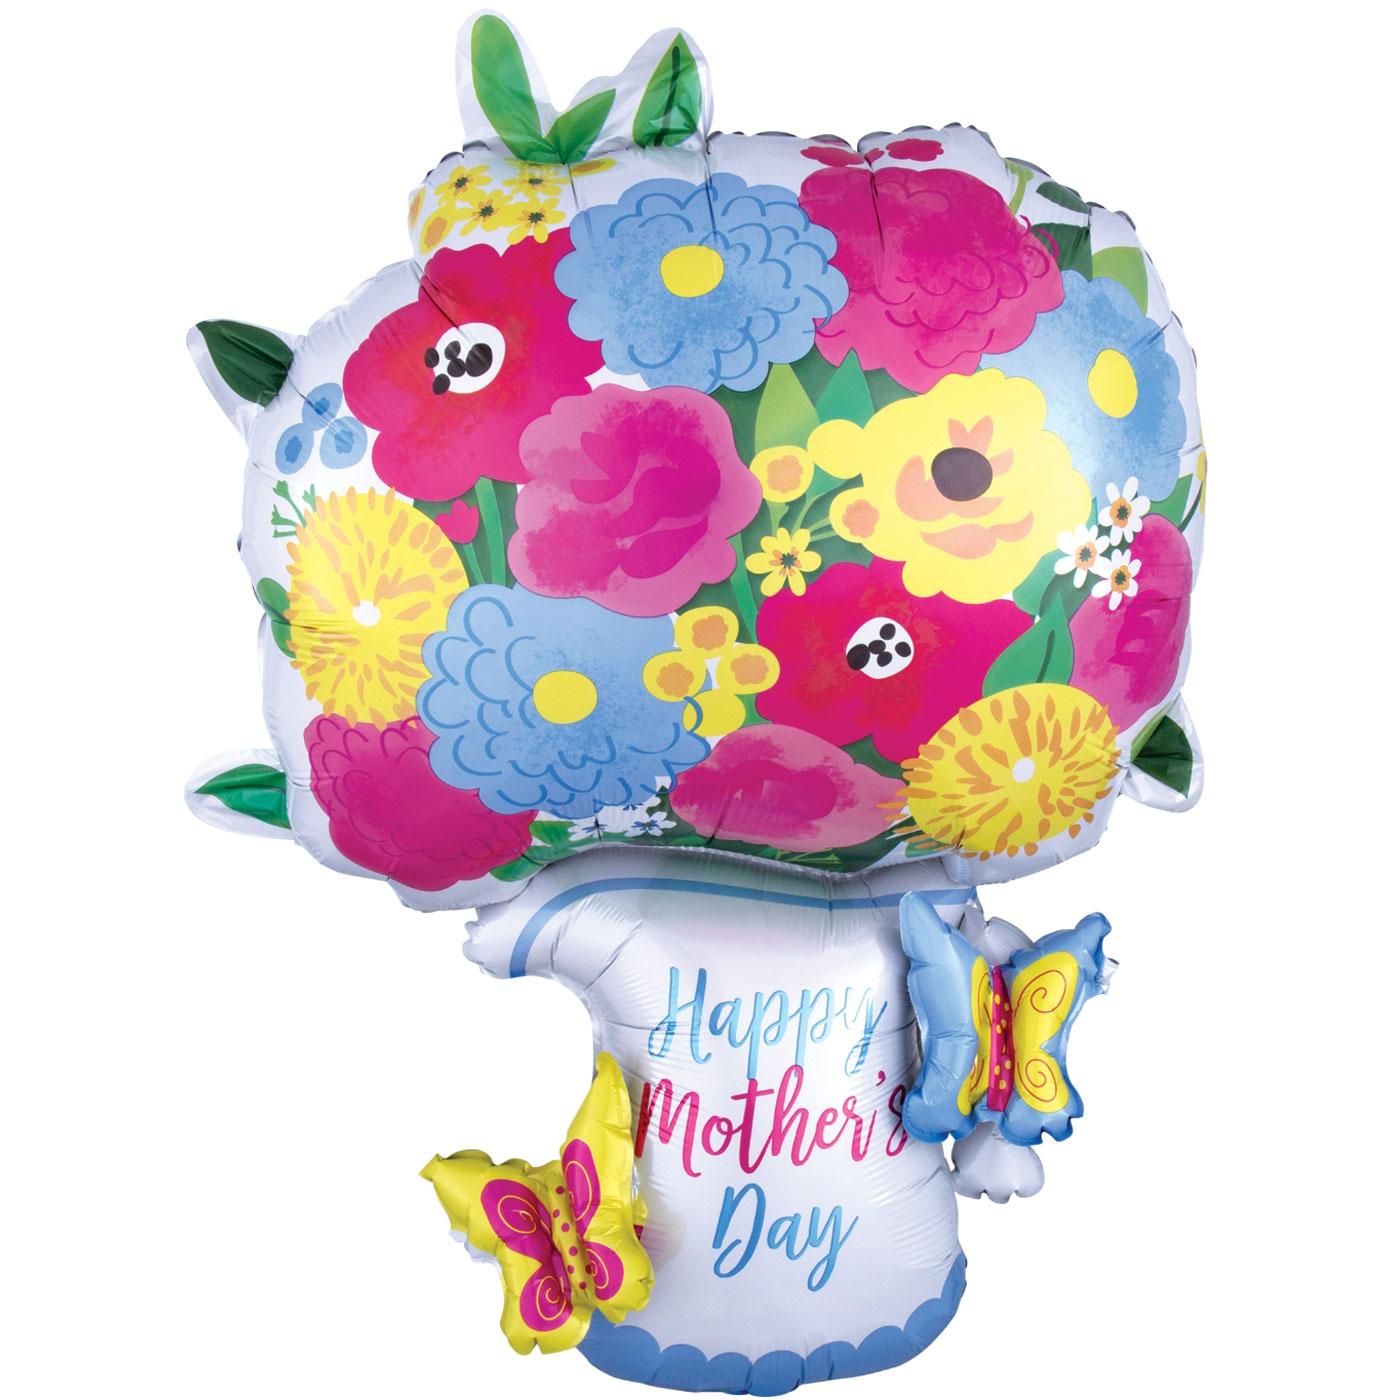 Happy Mother's Day Pitcher Garland Multi-Balloon 63x86cm Balloons & Streamers - Party Centre